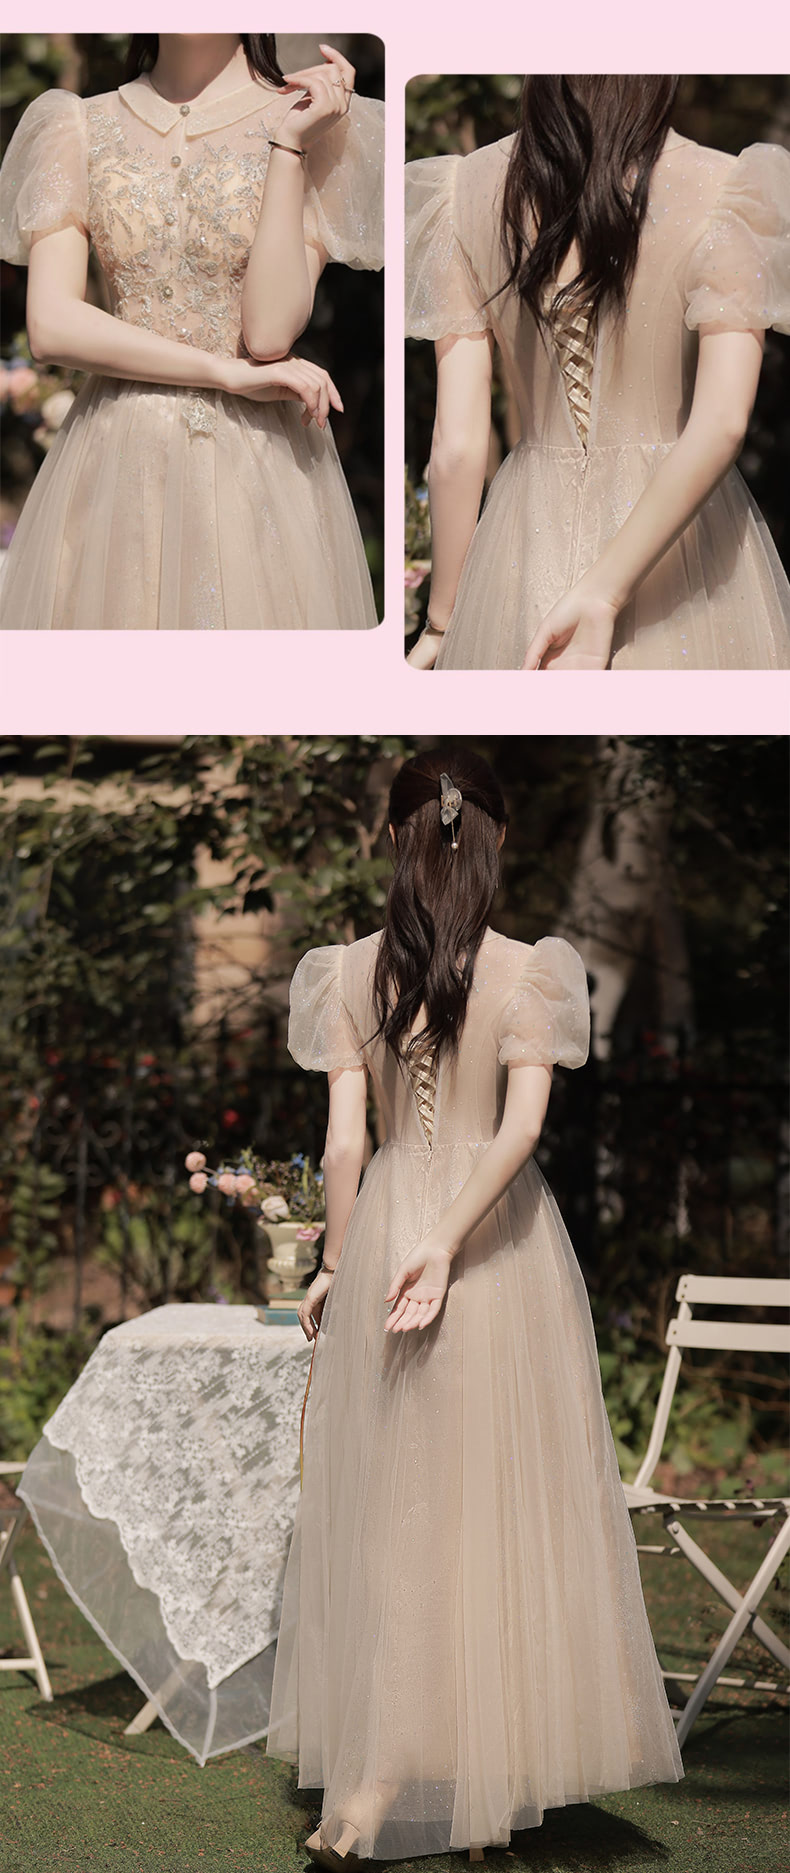 Formal-Apricot-Bridesmaid-Dress-Evening-Gown-for-Wedding-Party20.jpg